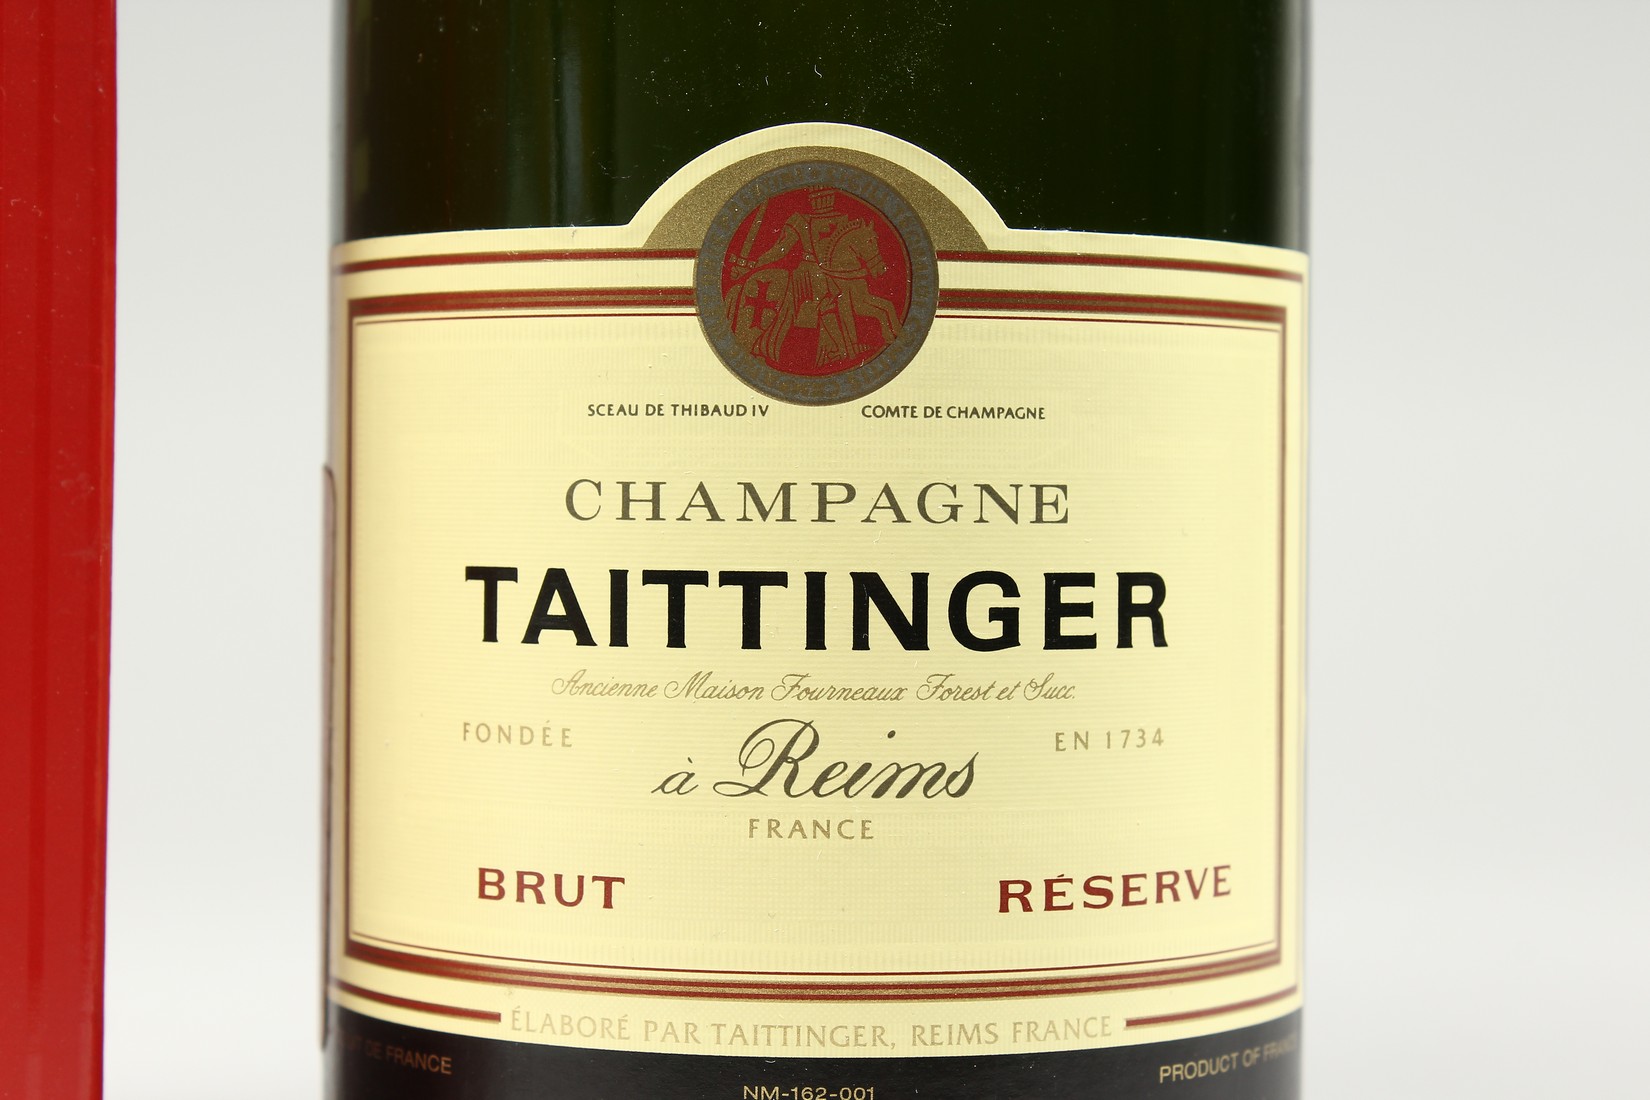 A BOTTLE OF TATTINGER CHAMPAGNE in an unopened box. - Image 2 of 8